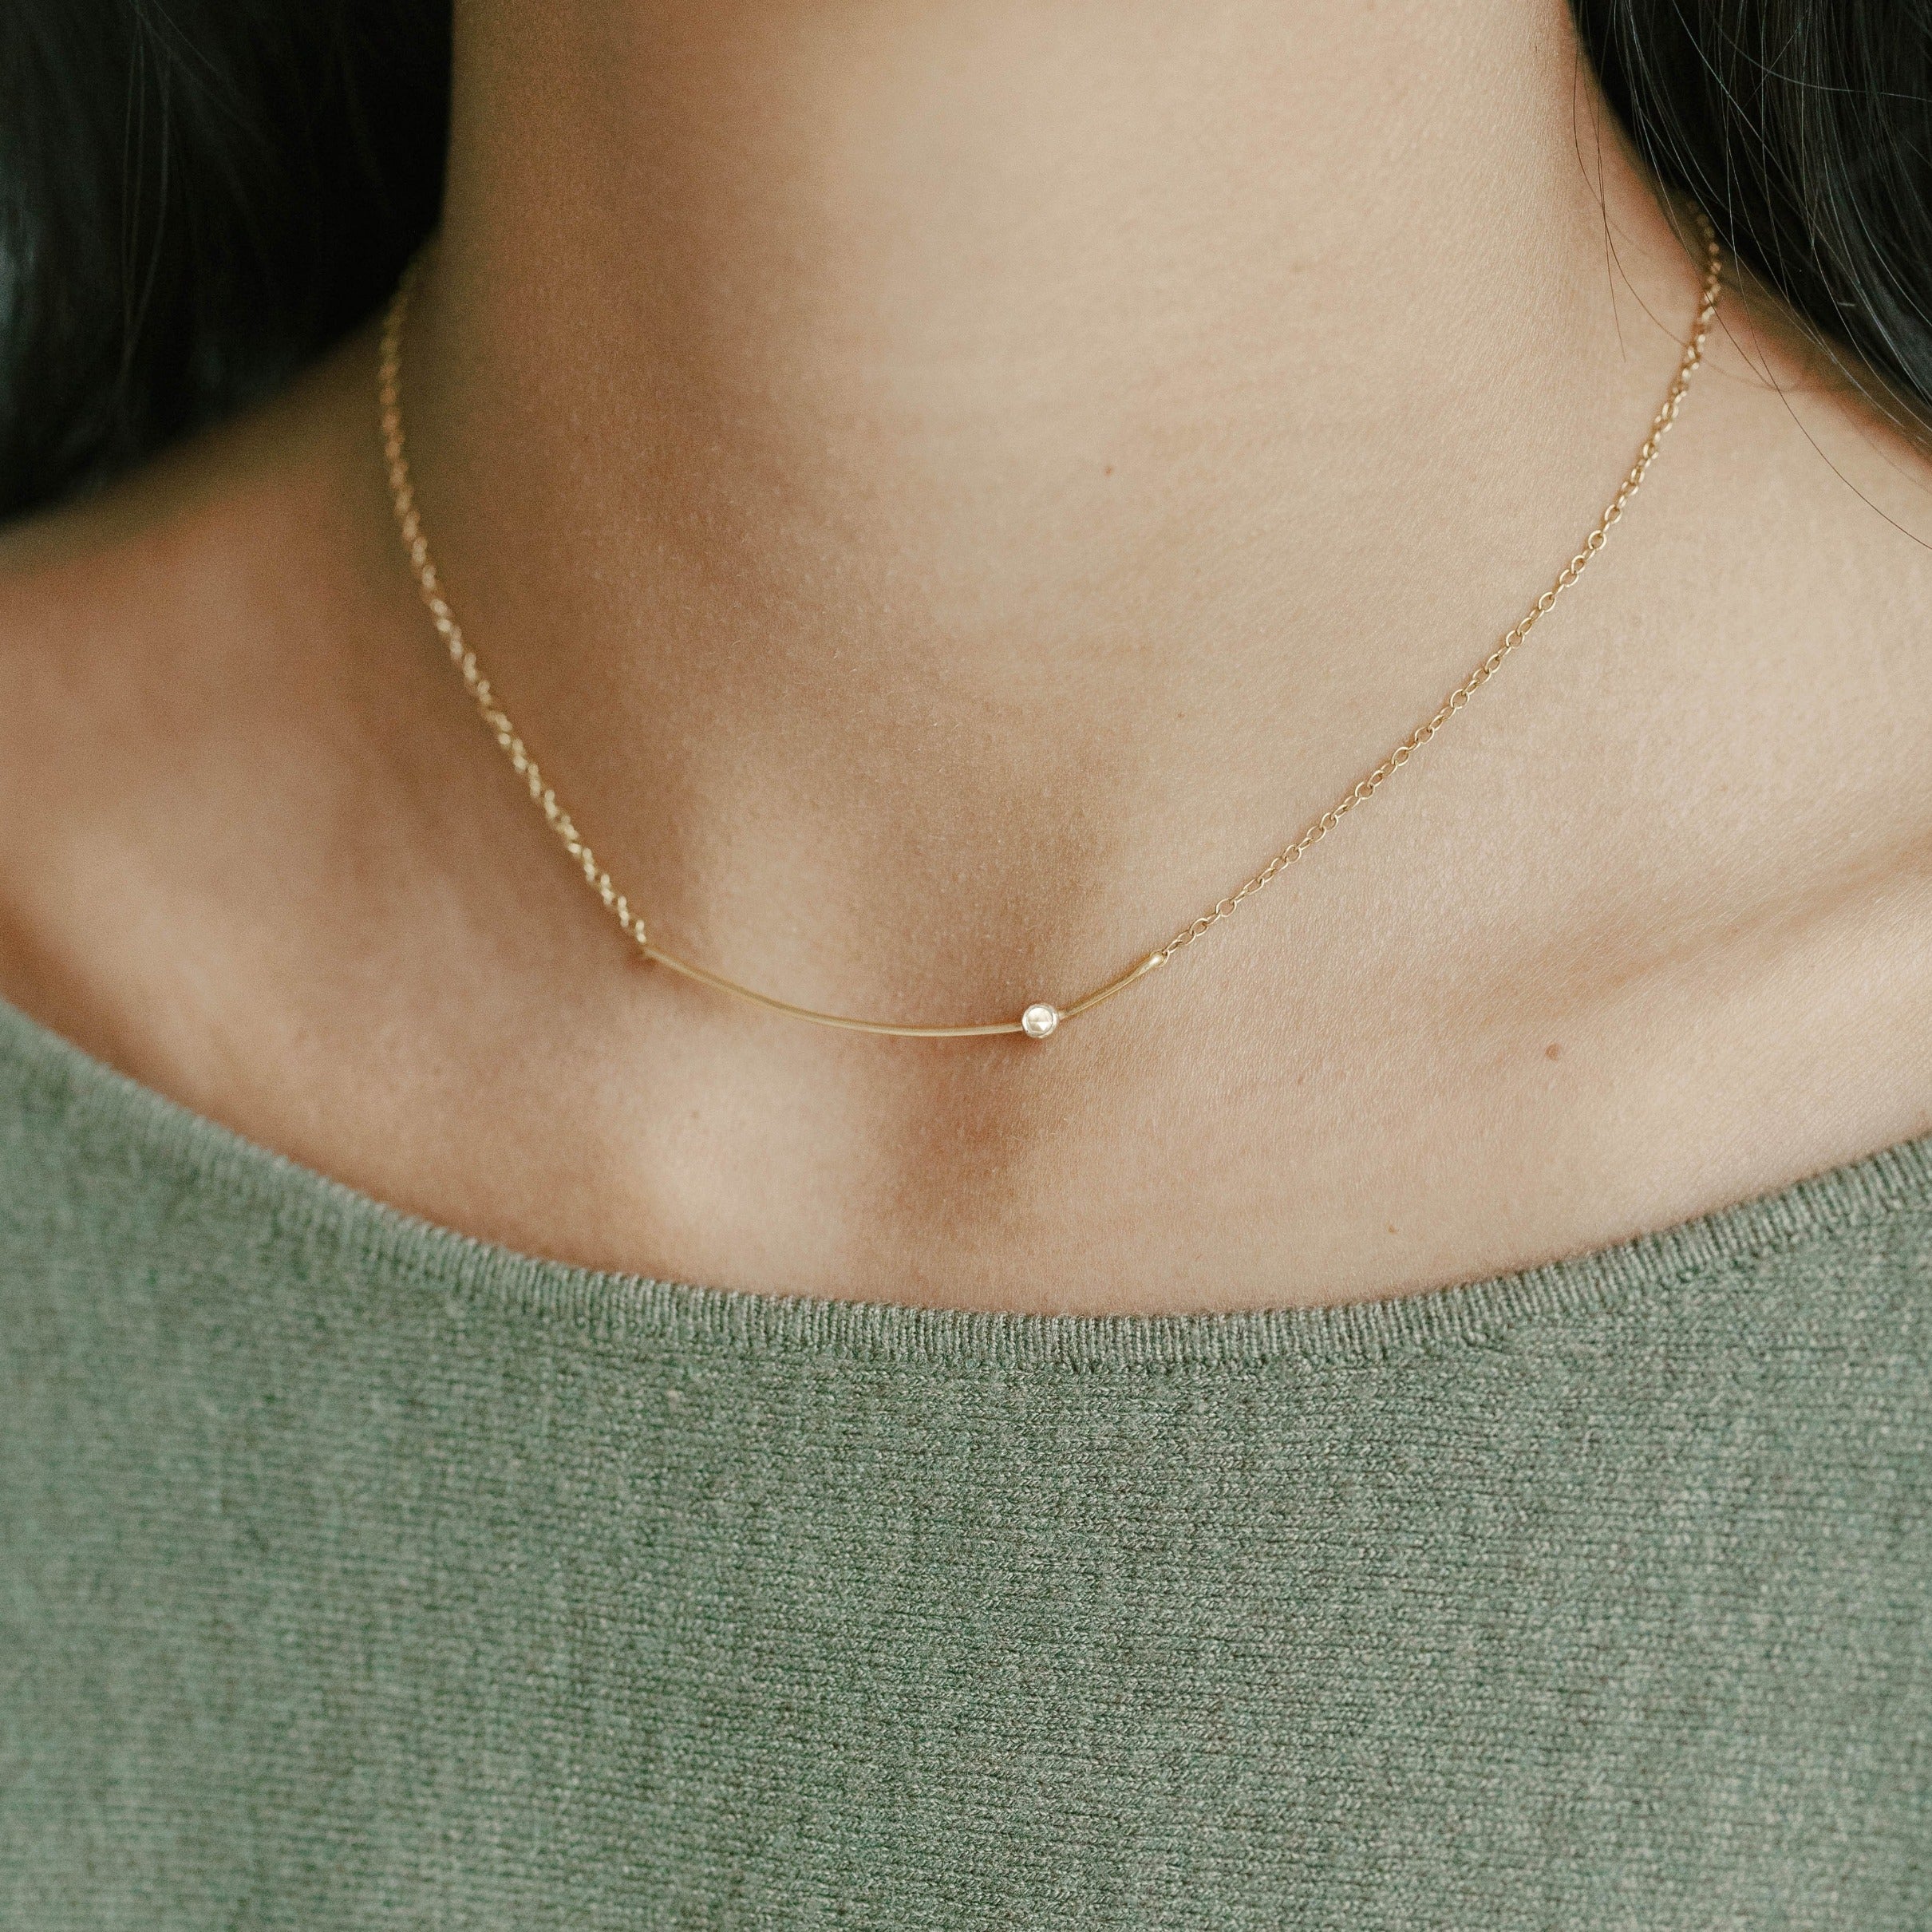 Recycled gold curved bar necklace with white topaz